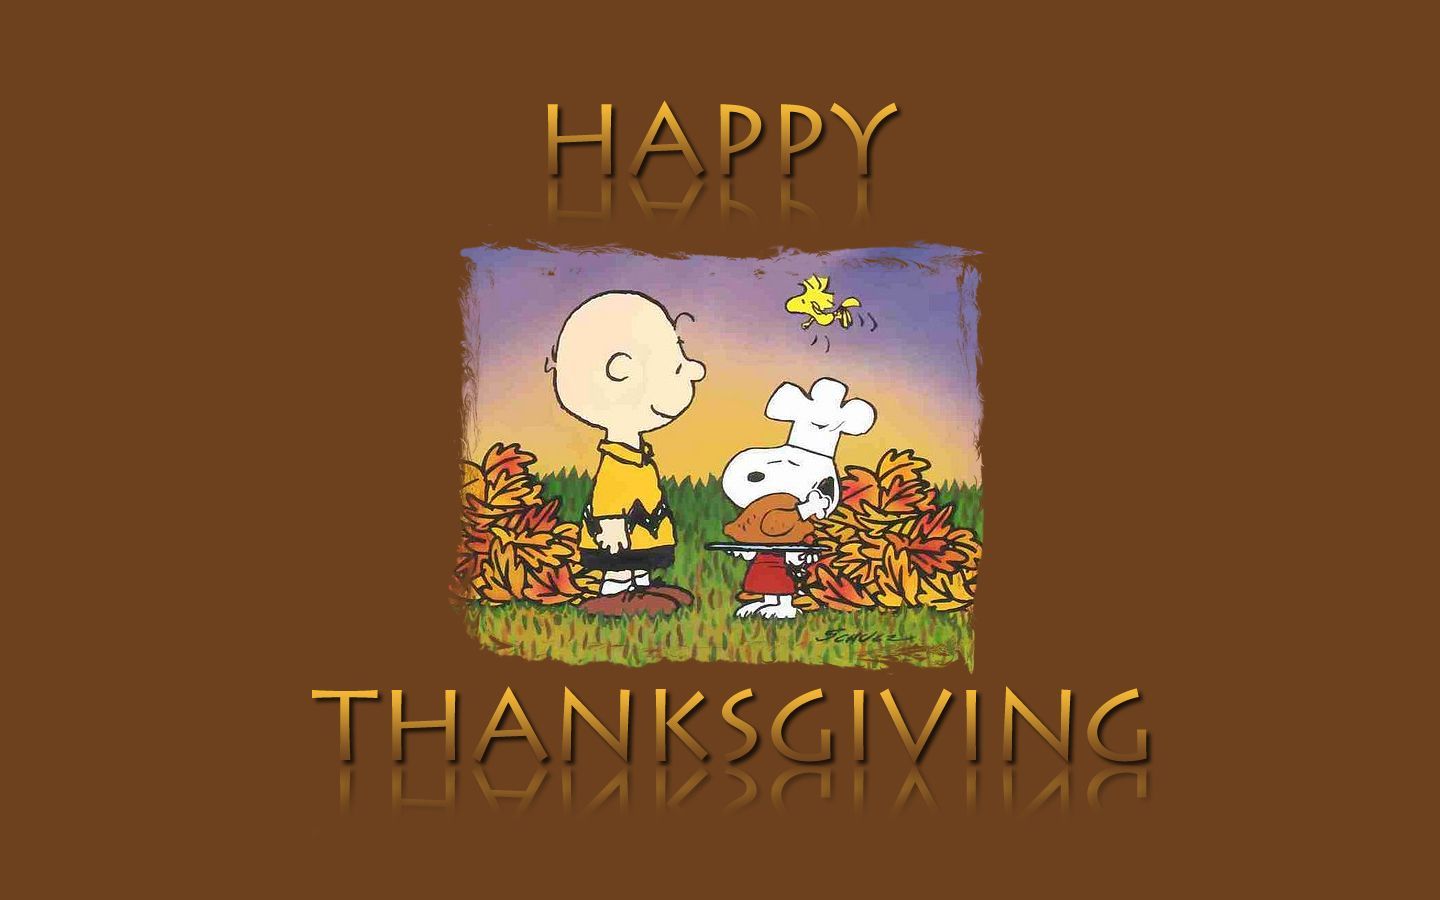 Snoopy. Happy thanksgiving wallpaper, Thanksgiving snoopy, Happy thanksgiving image